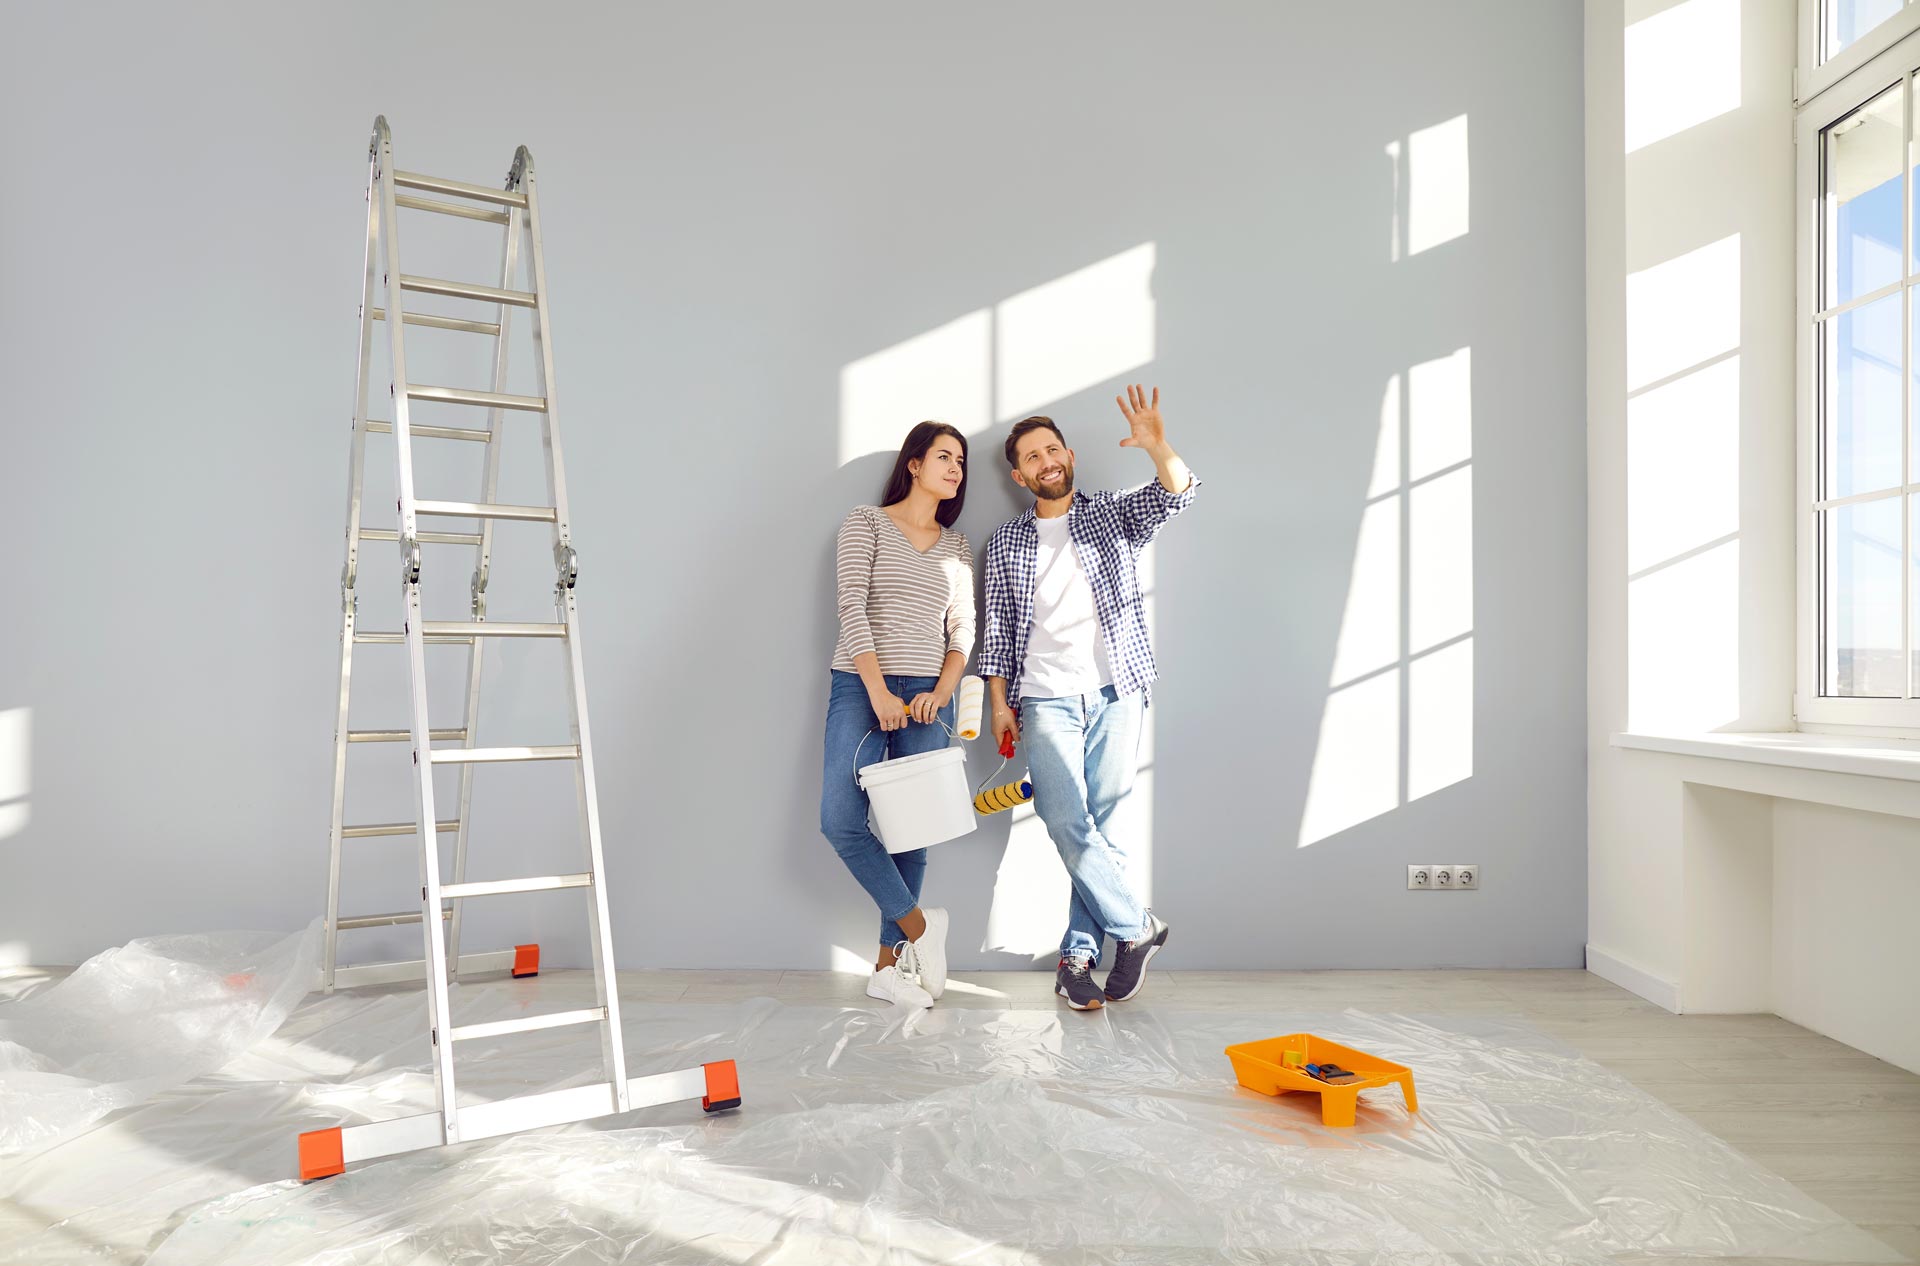 Couple discussing construction plans while leaning on a wall and surrounded by tools